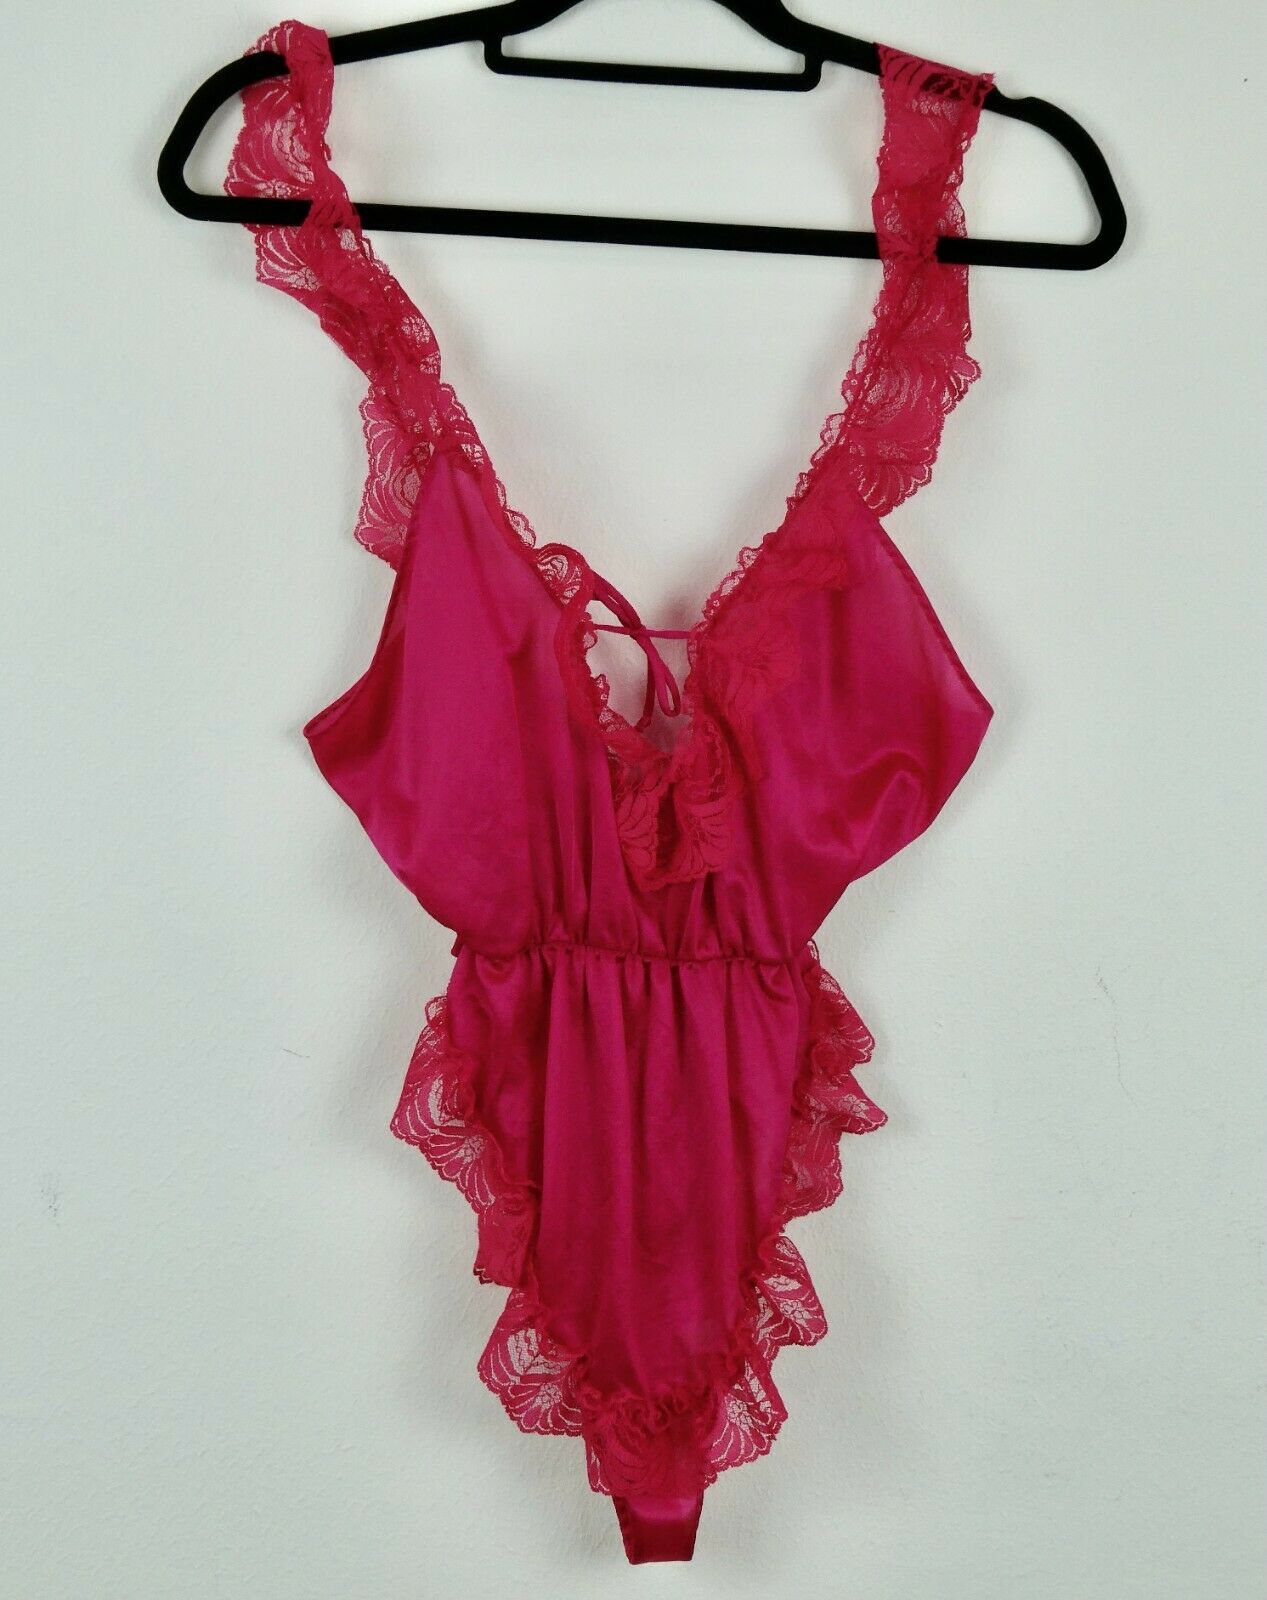 Vintage 80s Hot Pink Nylon Teddy Lingerie Negligee Lace S M Ruffle High Cut